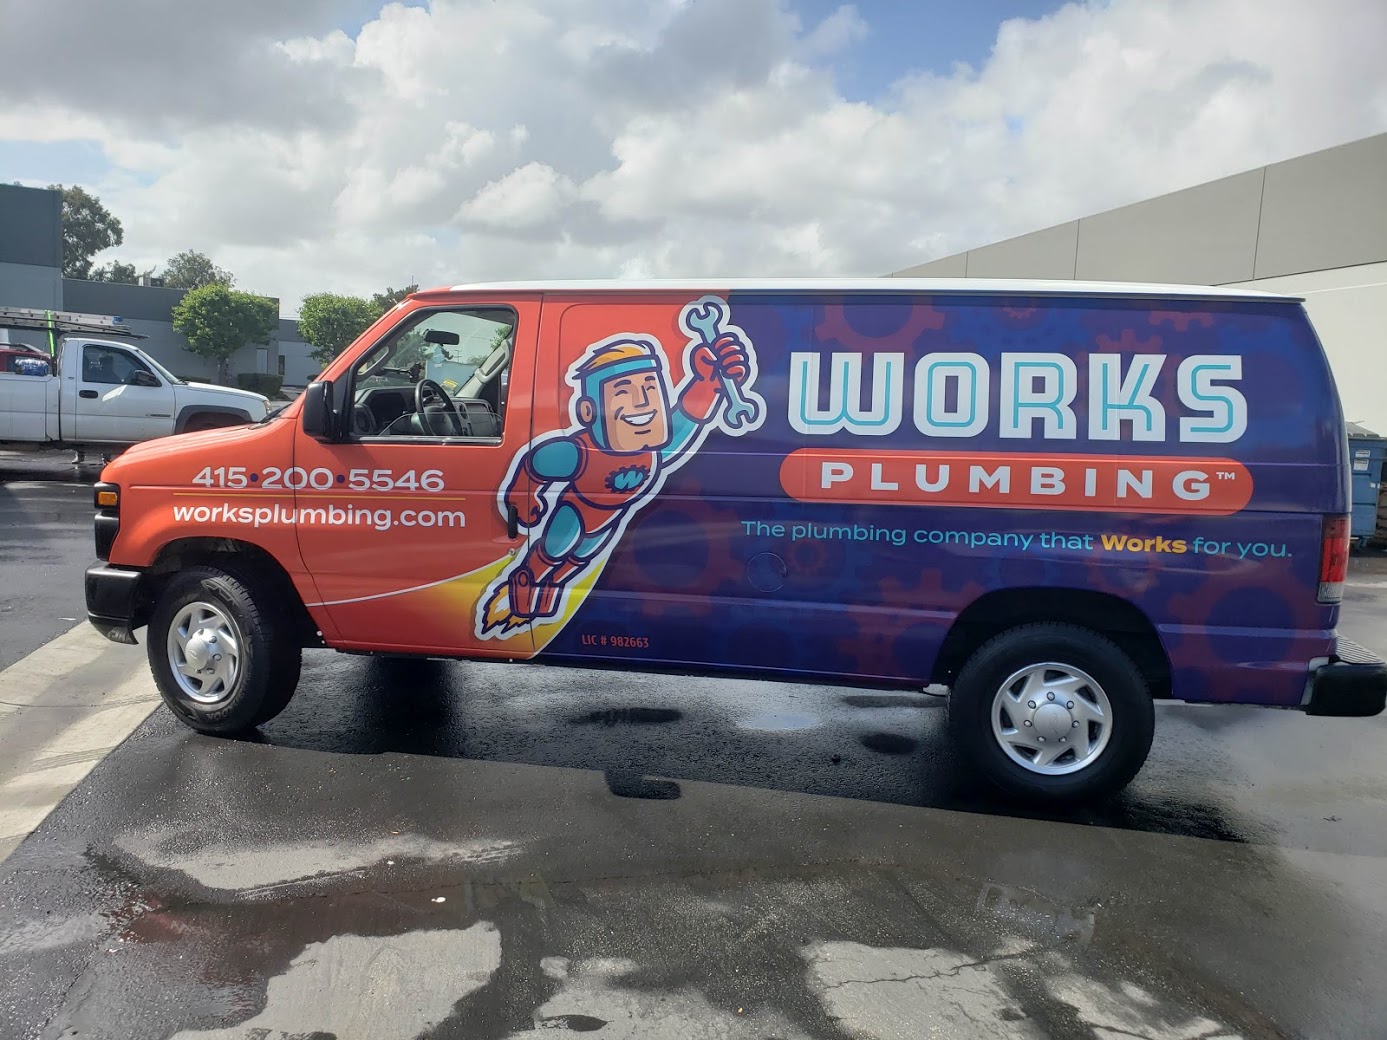 Works Plumbing - Commercial Vehicle Wraps - San Francisco Bay Area